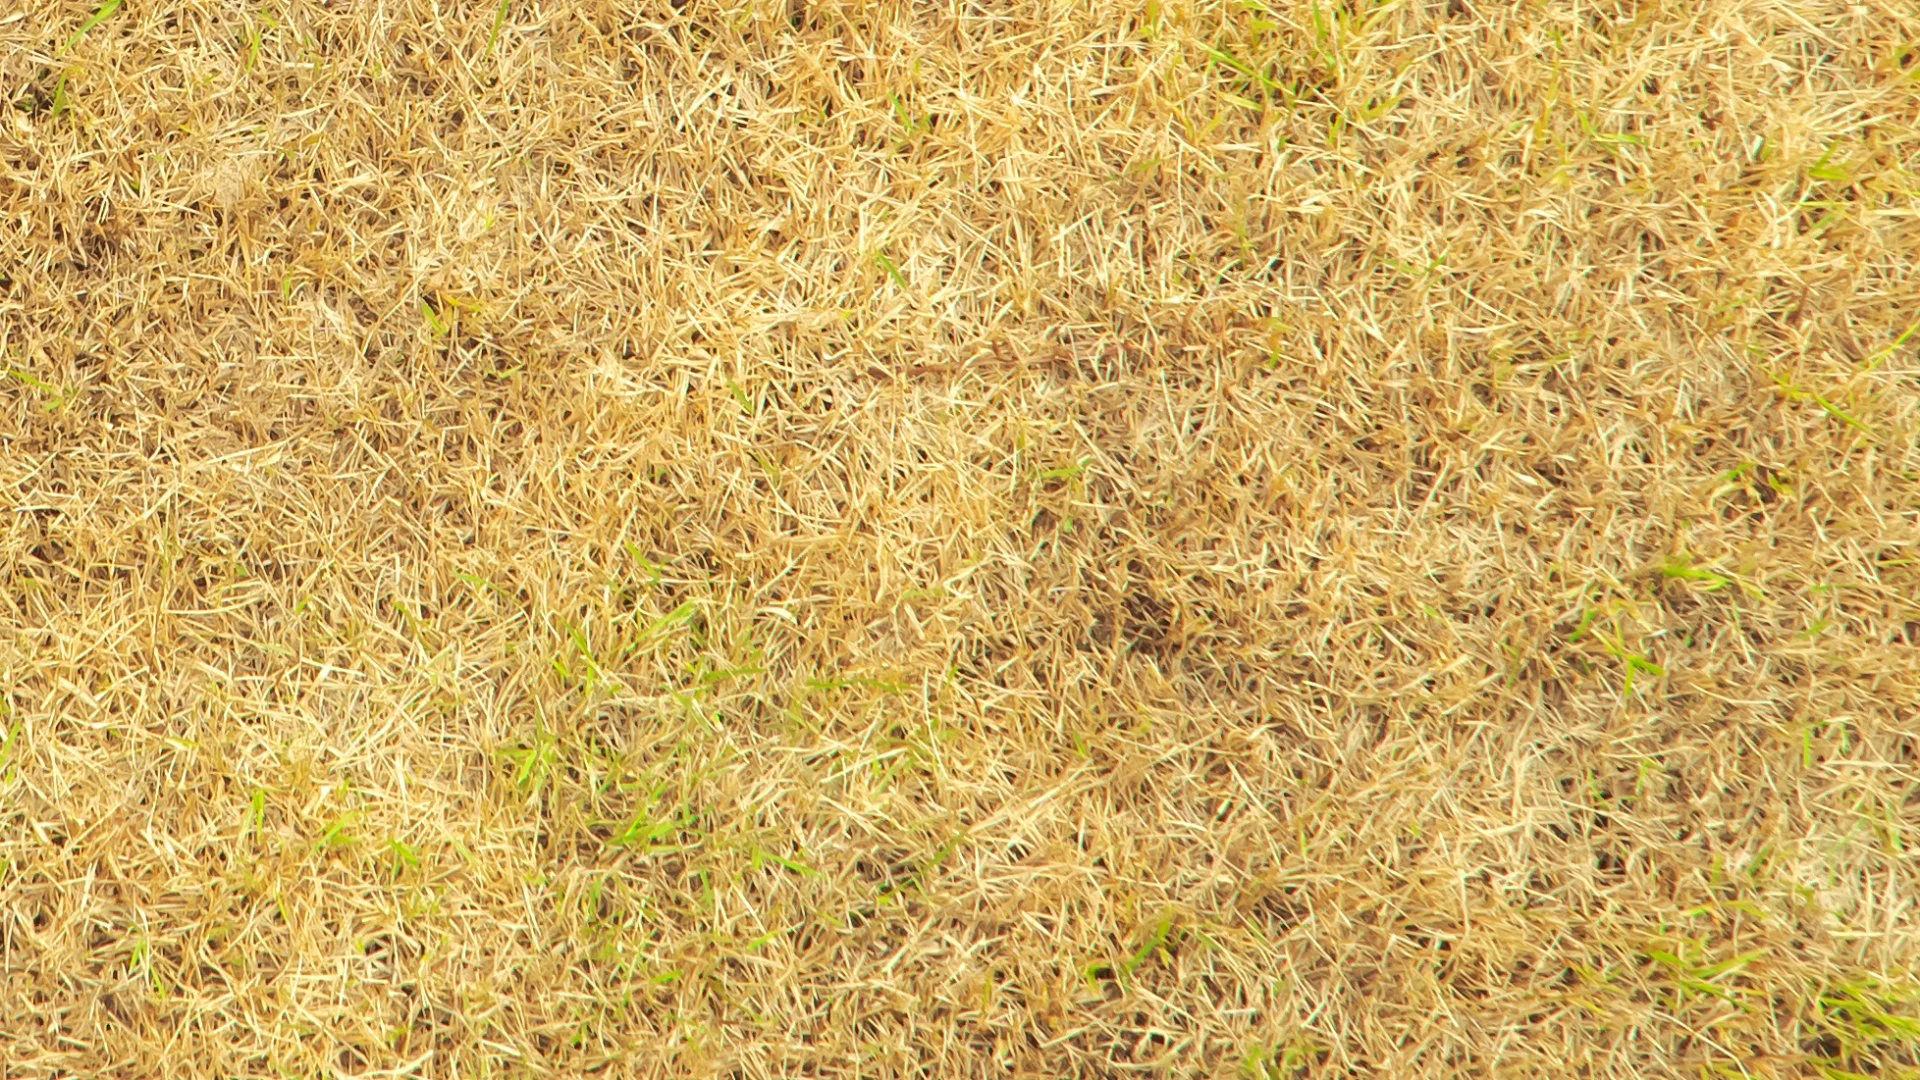 One of These Problems Could Be Causing Your Brown Lawn!